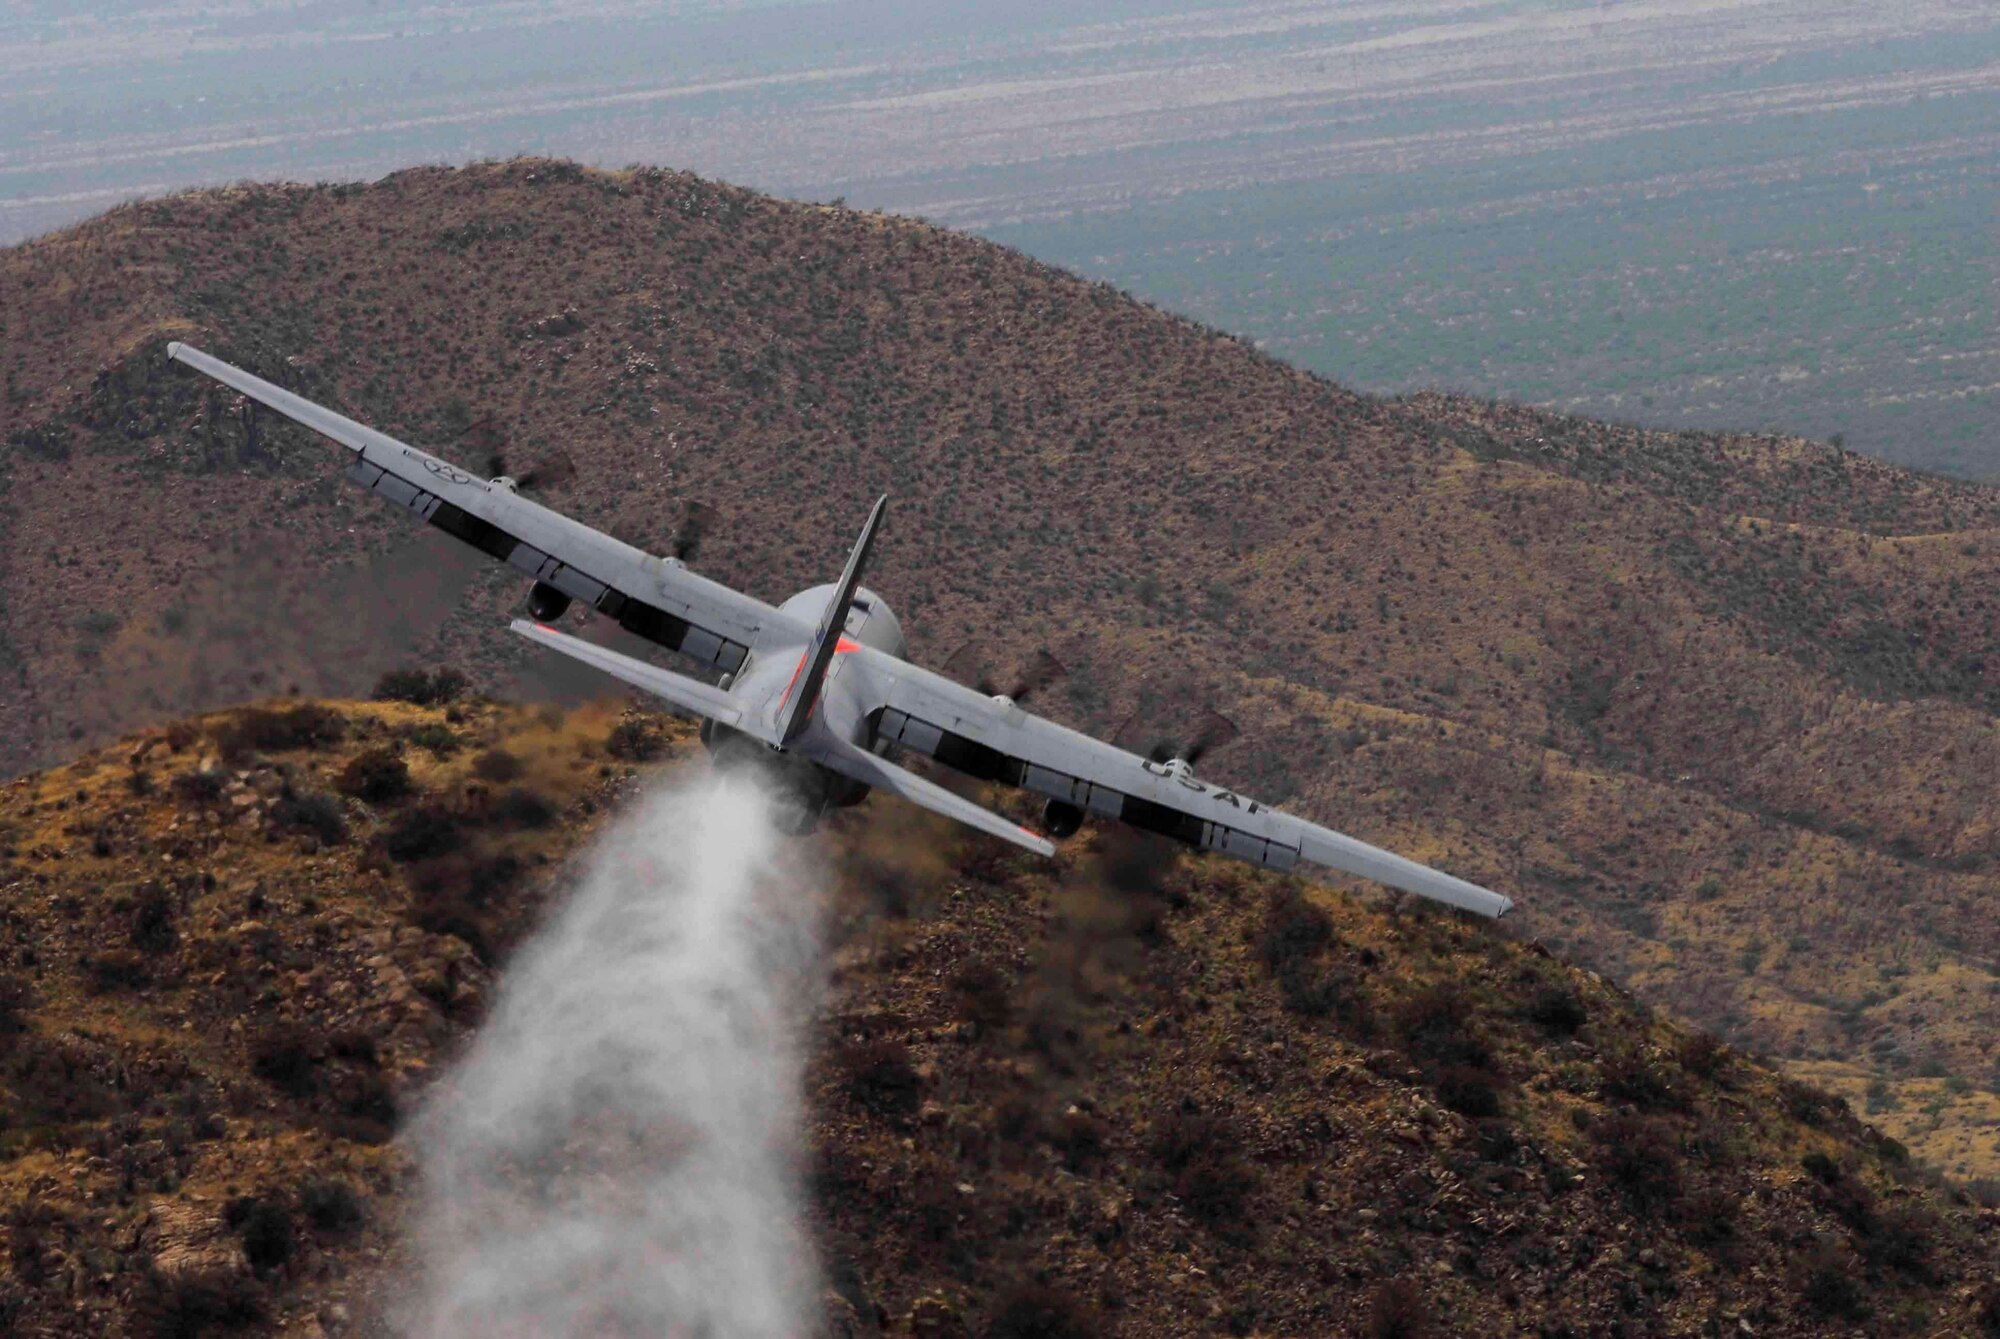 Tucson, Ariz. (May 6, 2009) ? C-130 Aircraft flown by the 145th Airlift Wing, an Air National Guard unit from Charlotte, NC maneuvers close while contour flying to drop a load of simulated retardant during Modular Aerial Fire Fighting training May 3-9 in the Coronado National Forest of Southeastern Arizona. The 145th AW is a contingent of the 302nd Air Expeditionary Group, part of a unified military support effort of U.S. Northern Command to provide assistance to the U.S. Forest Service, state and local agencies, and the National Interagency Fire Center in battling large, uncontrolled wildfires throughout the nation.  The 145th AW is performing upgrade and initial training of aircrews, maintenance crews, and aviation resource management staff as they and three other Airlift Wings from Colorado, California and Wyoming qualify for MAFFS operations in Annual training exercises this week. (Photo by MSgt Dan Beaudreau)